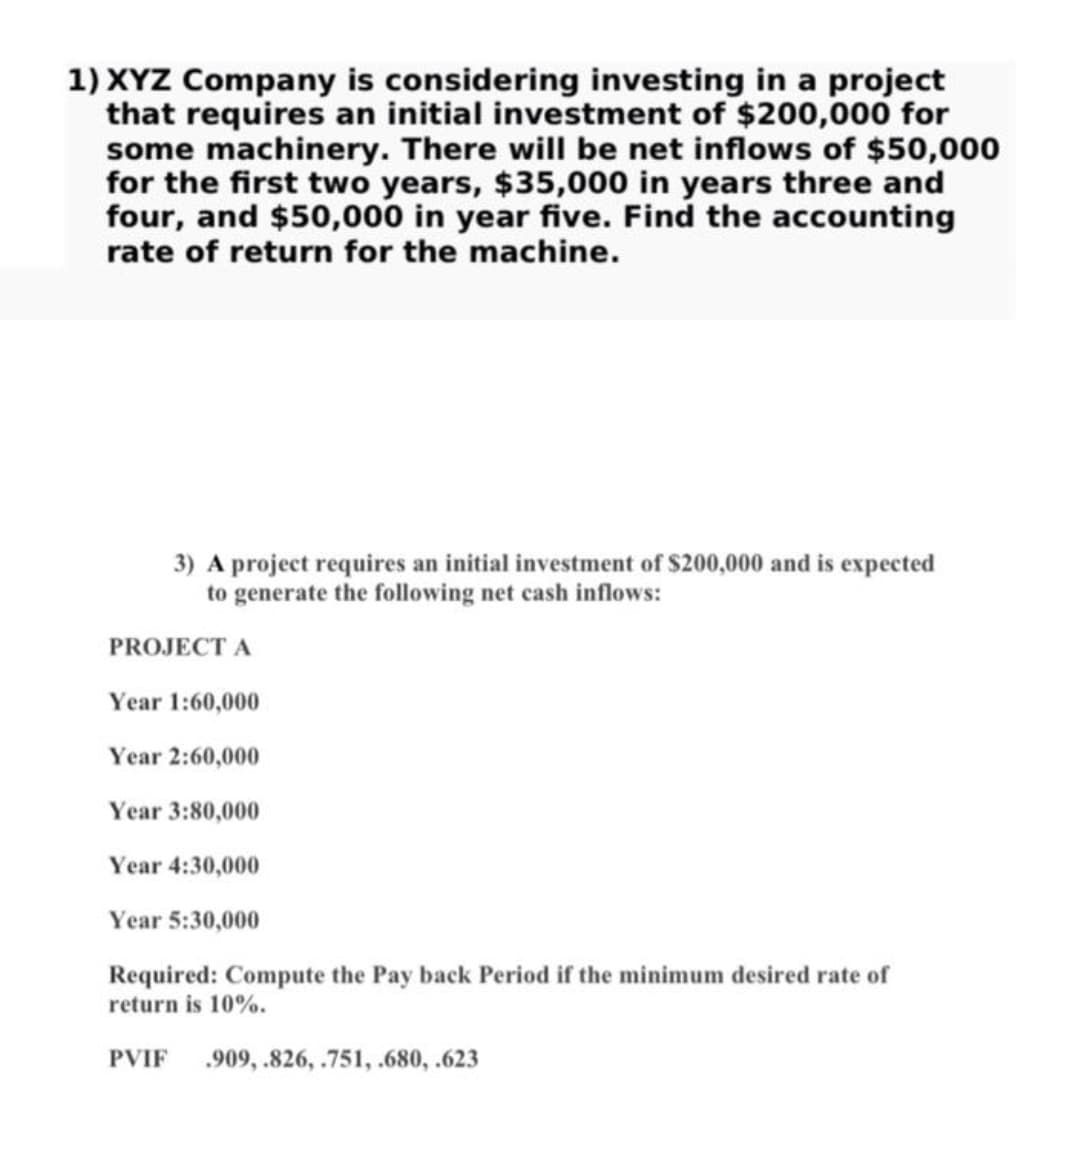 1) XYZ Company is considering investing in a project
that requires an initial investment of $200,000 for
some machinery. There will be net inflows of $50,000
for the first two years, $35,000 in years three and
four, and $50,000 in year five. Find the accounting
rate of return for the machine.
3) A project requires an initial investment of $200,000 and is expected
to generate the following net cash inflows:
PROJECT A
Year 1:60,000
Year 2:60,000
Year 3:80,000
Year 4:30,000
Year 5:30,000
Required: Compute the Pay back Period if the minimum desired rate of
return is 10%.
PVIF .909, .826, .751, .680, .623